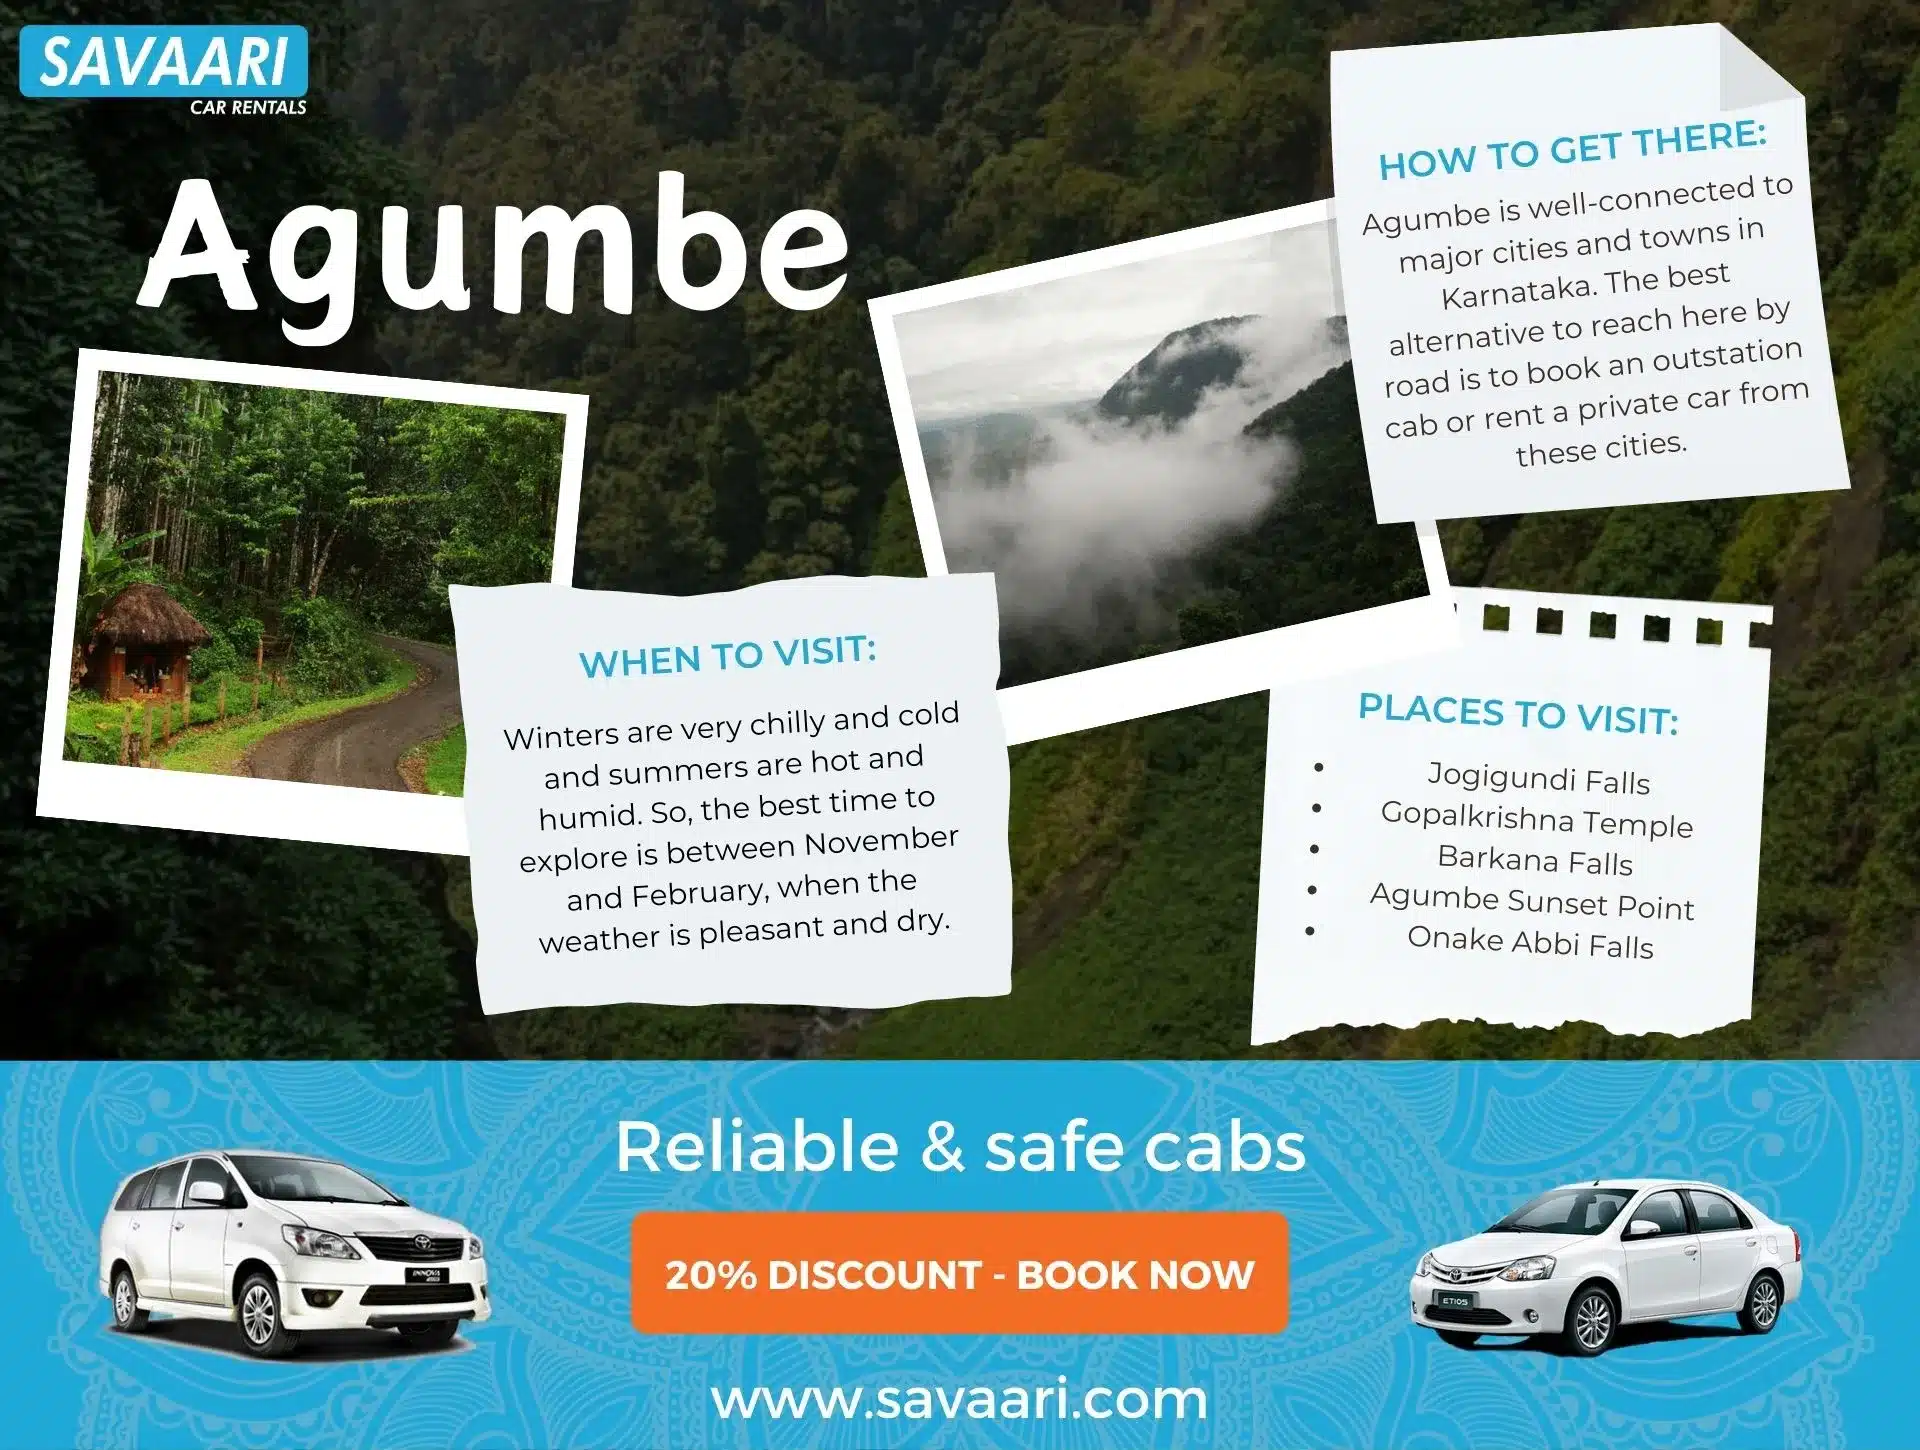 Things to do in Agumbe